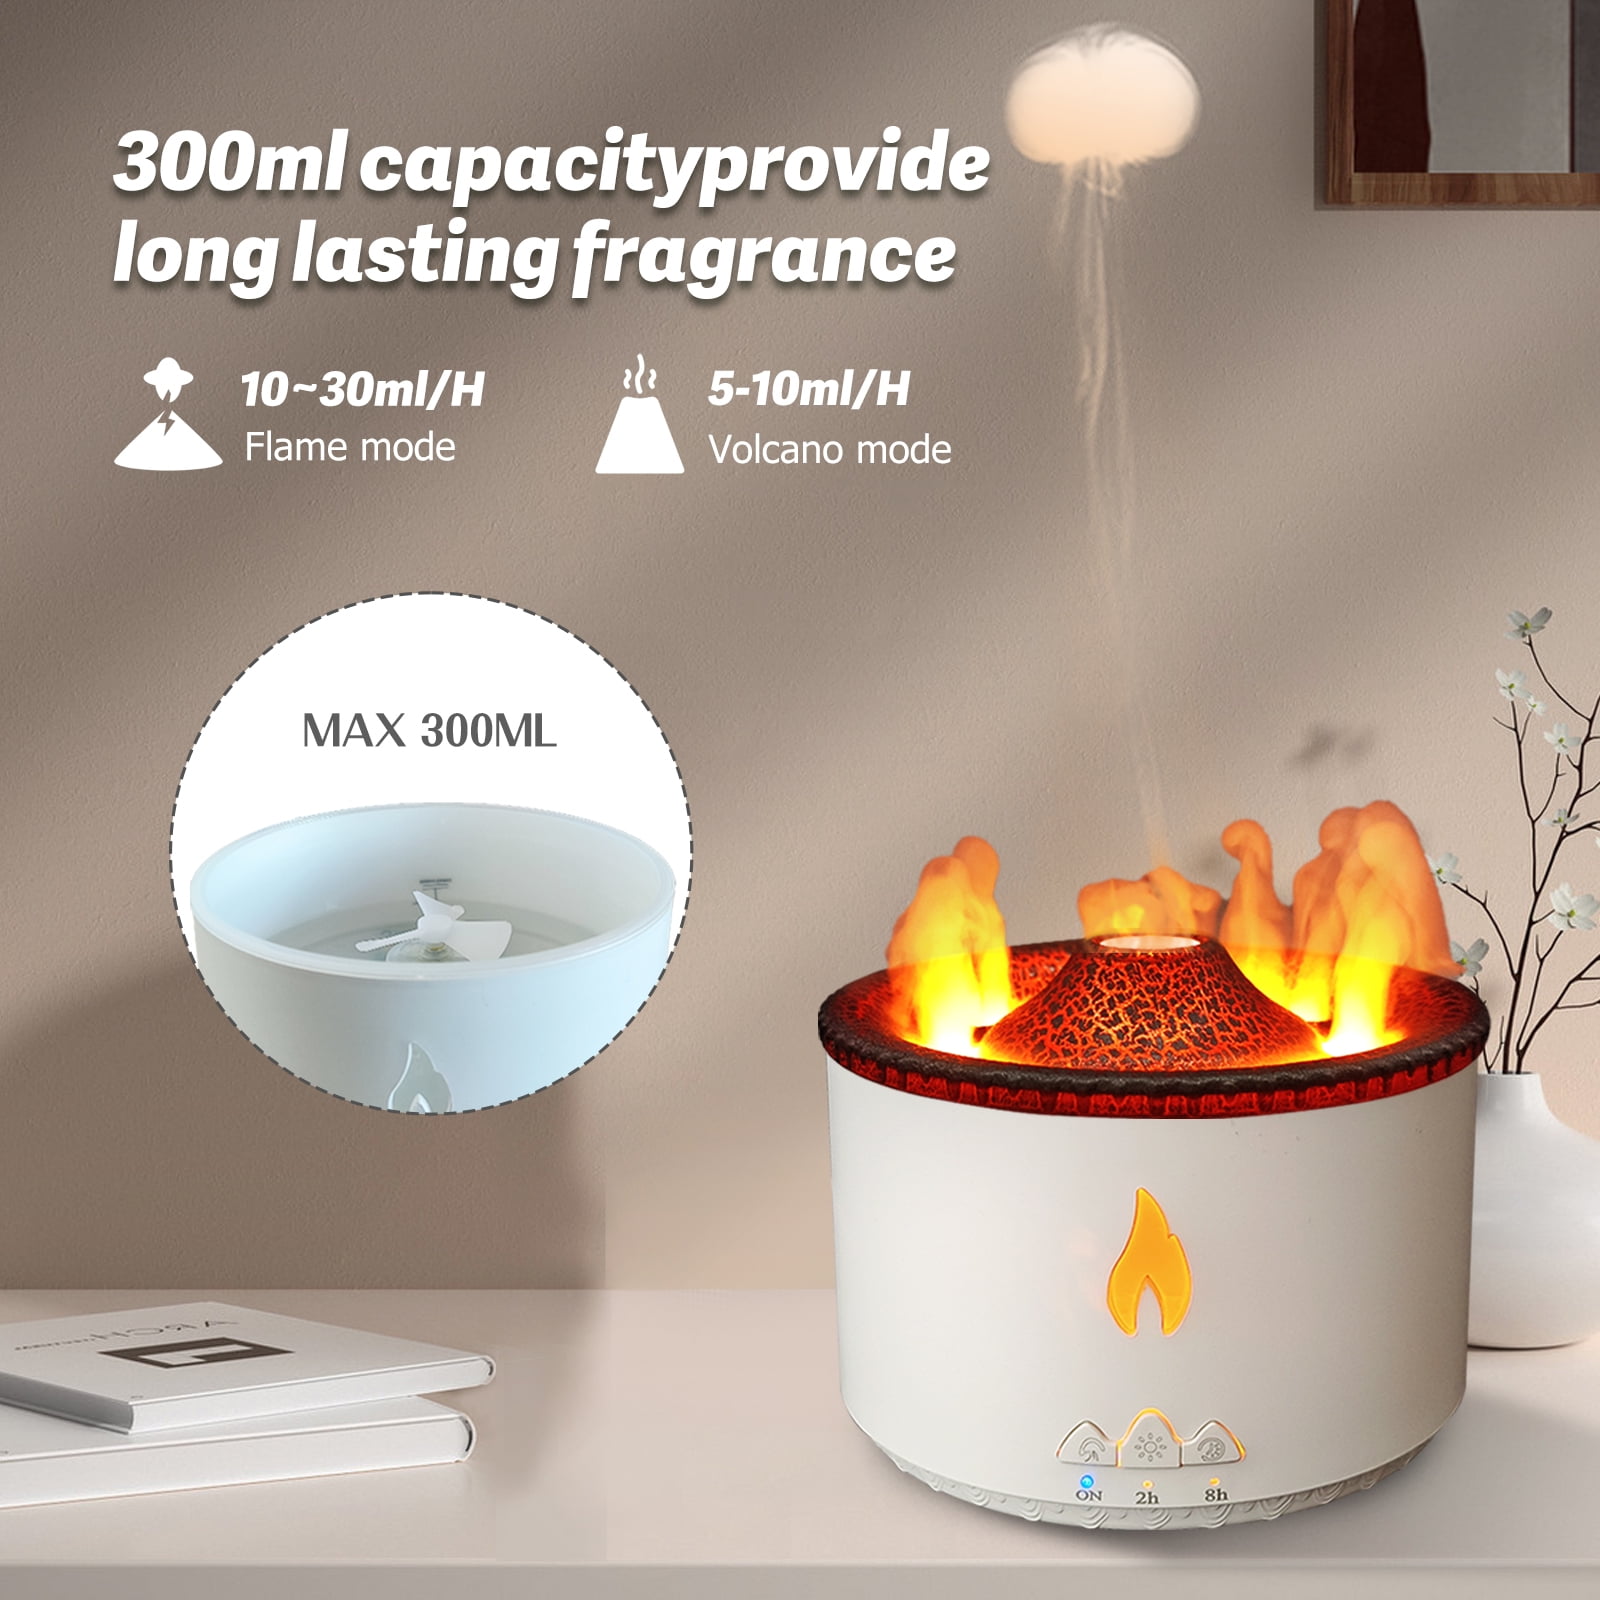 YALEDI Volcano Flame Diffuser, Aromatherapy Essential Oil Diffuser, 360ml  Cool Mist Ultrasonic Humidifier for Bedroom,Office,Home,Yoga, Timer & Auto